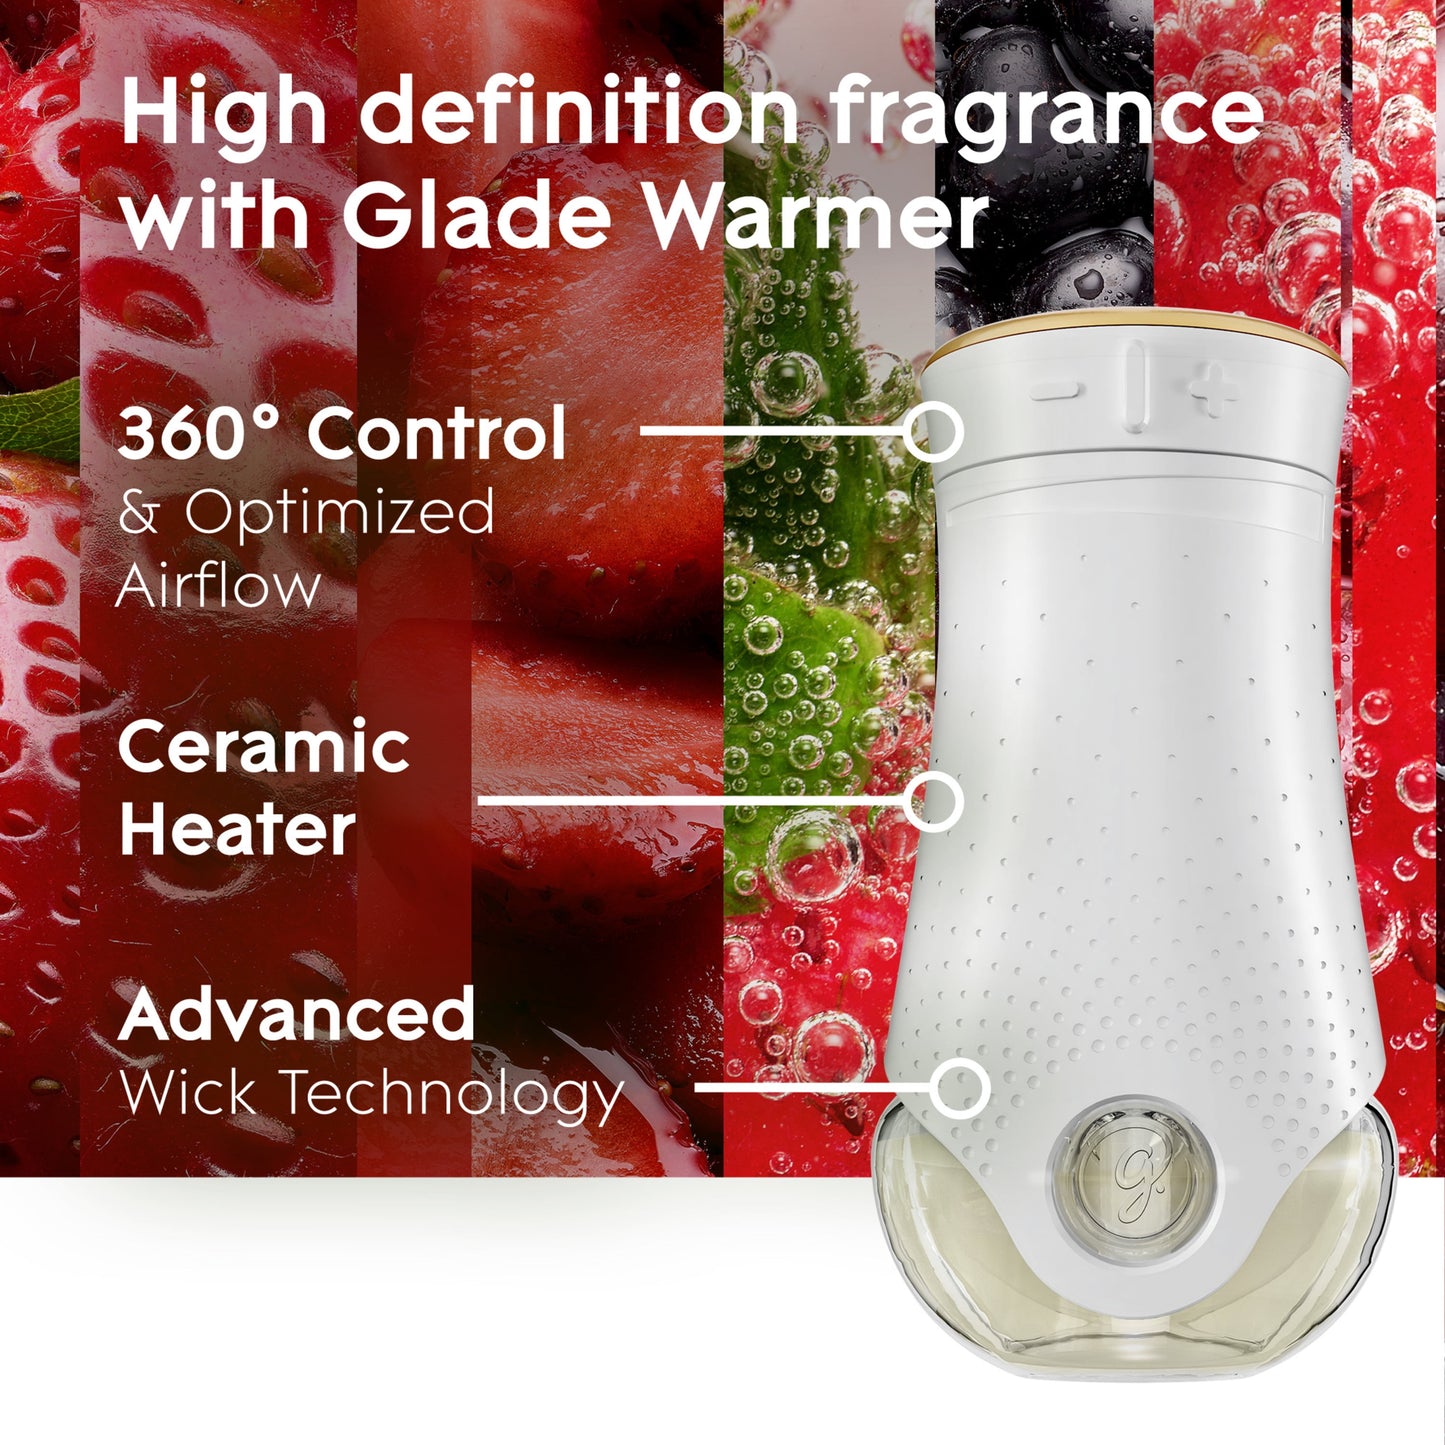 Glade PlugIns Scented Oil 5 Refills, Air Freshener, Bubbly Berry Splash, 5 x 1.34 oz